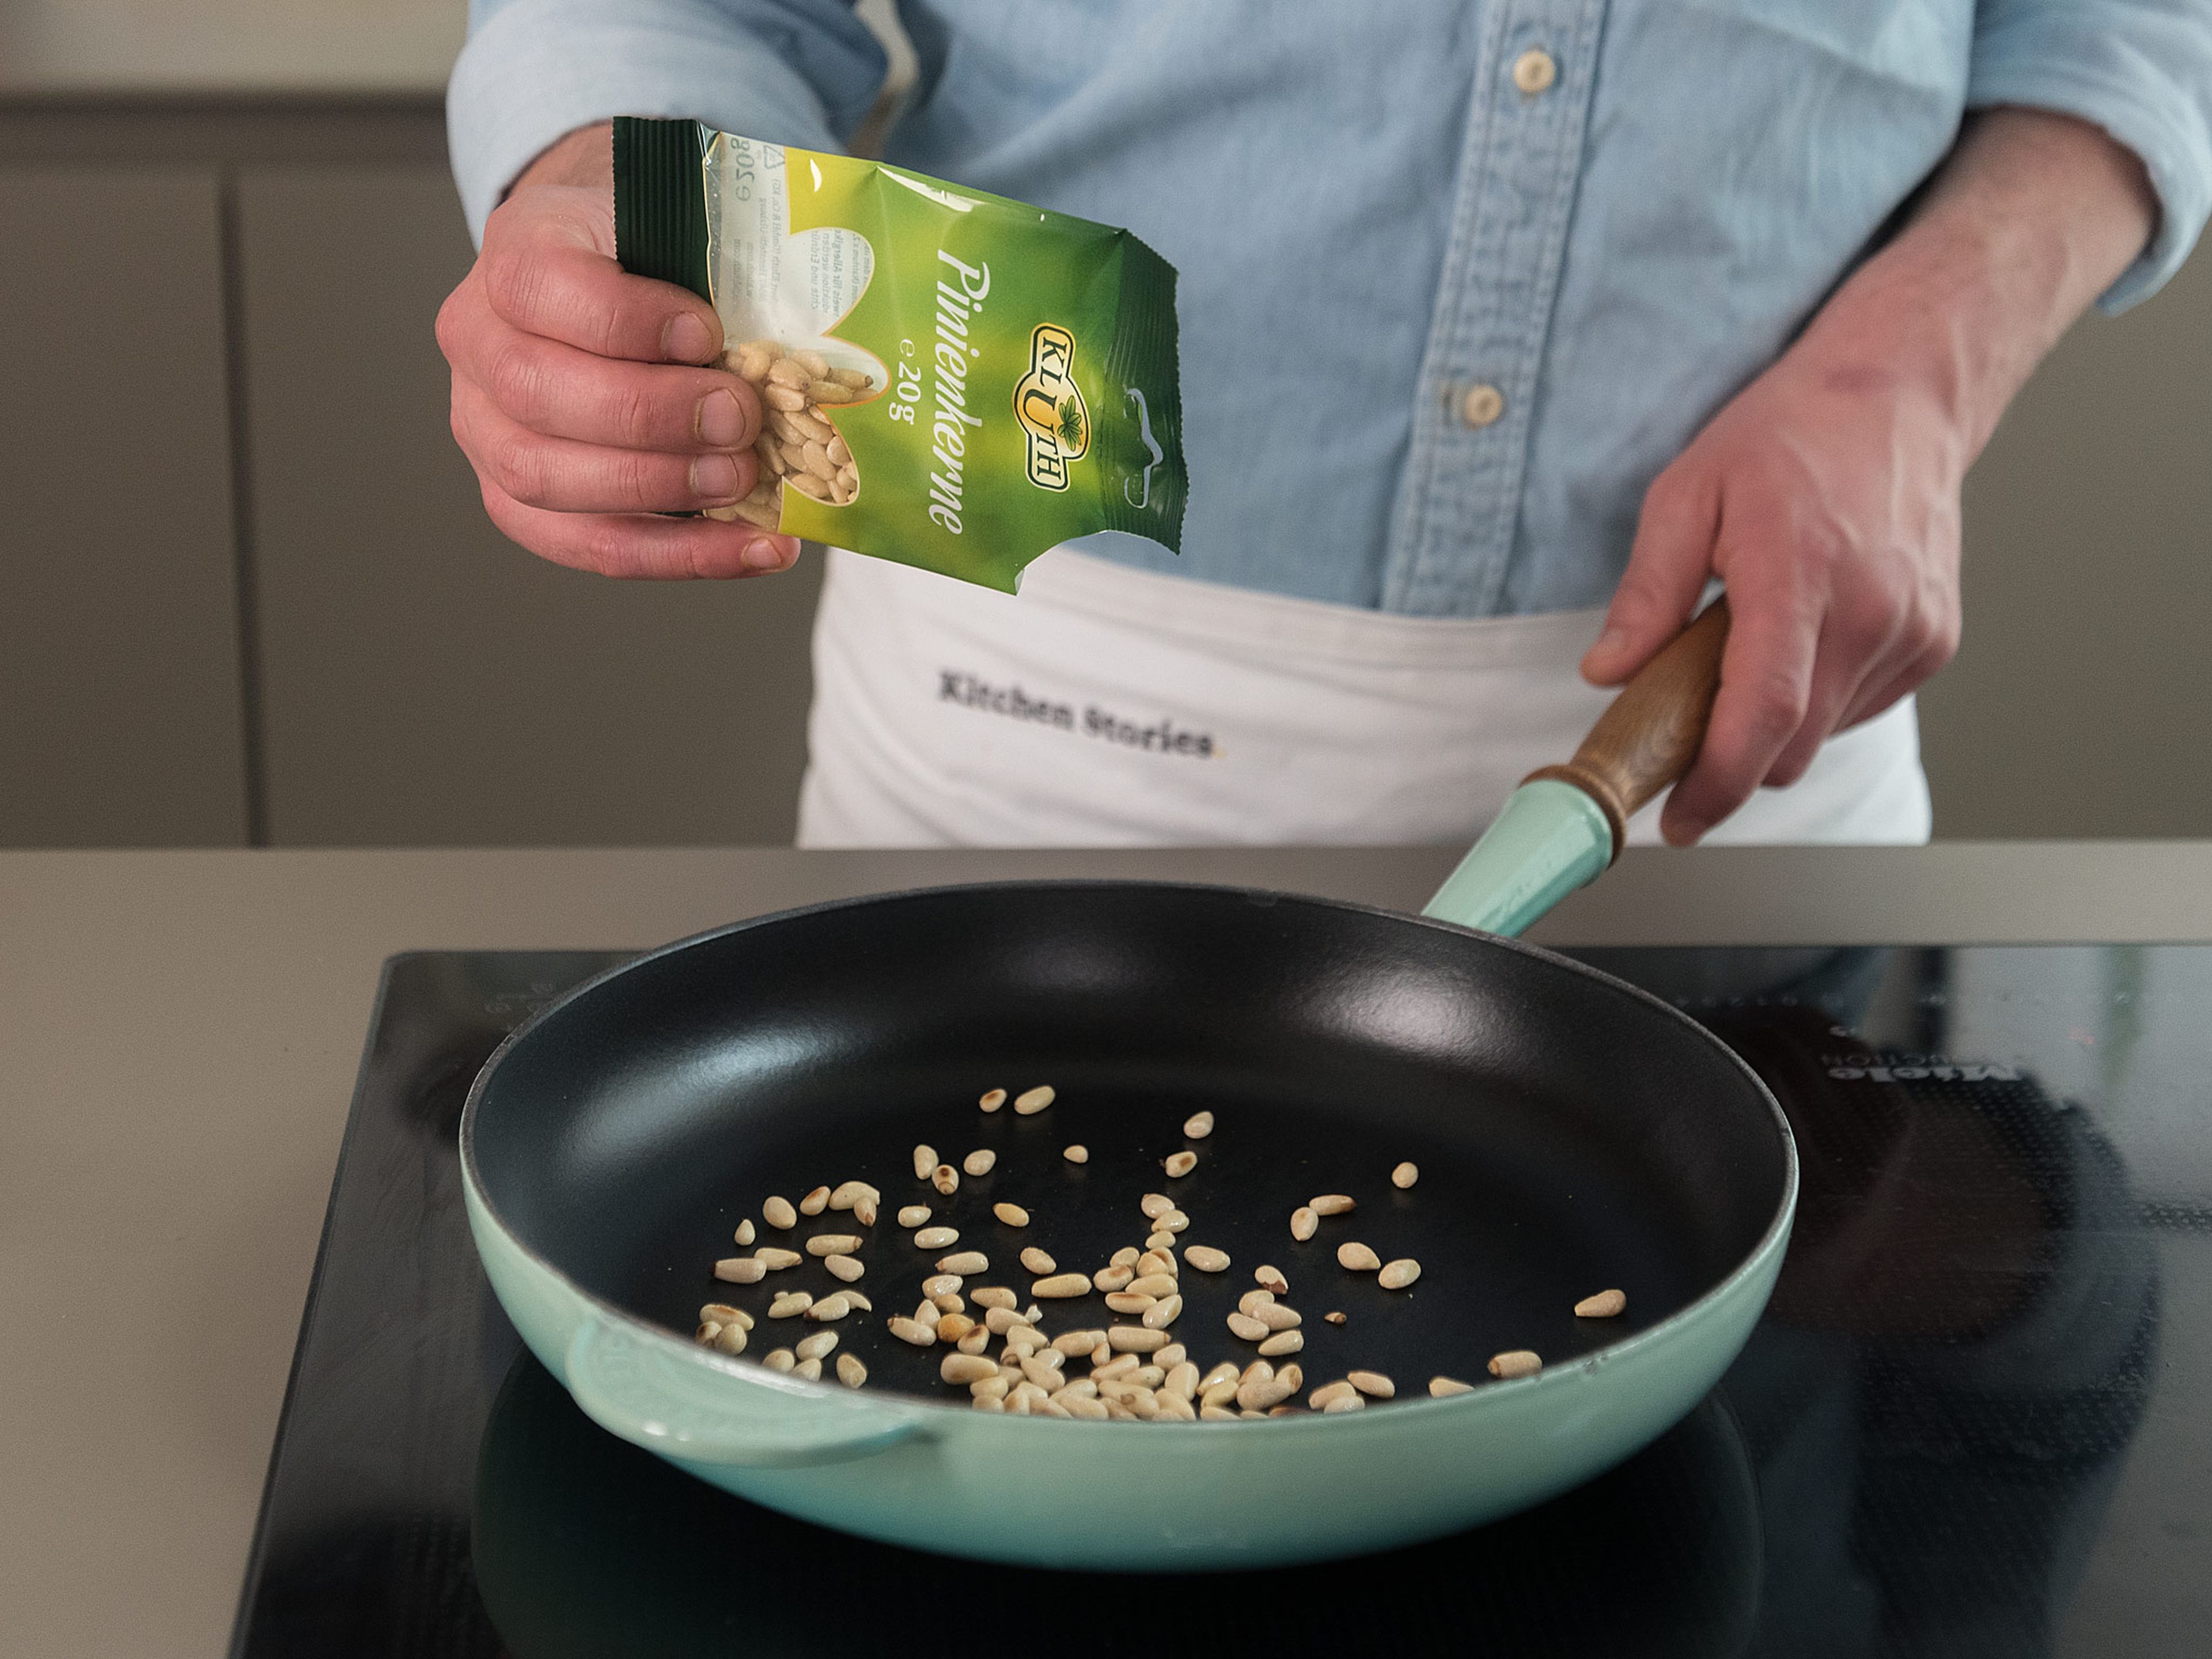 Toast pine nuts in a small frying pan for approx. 3 – 4 min. on medium-low heat until browned.